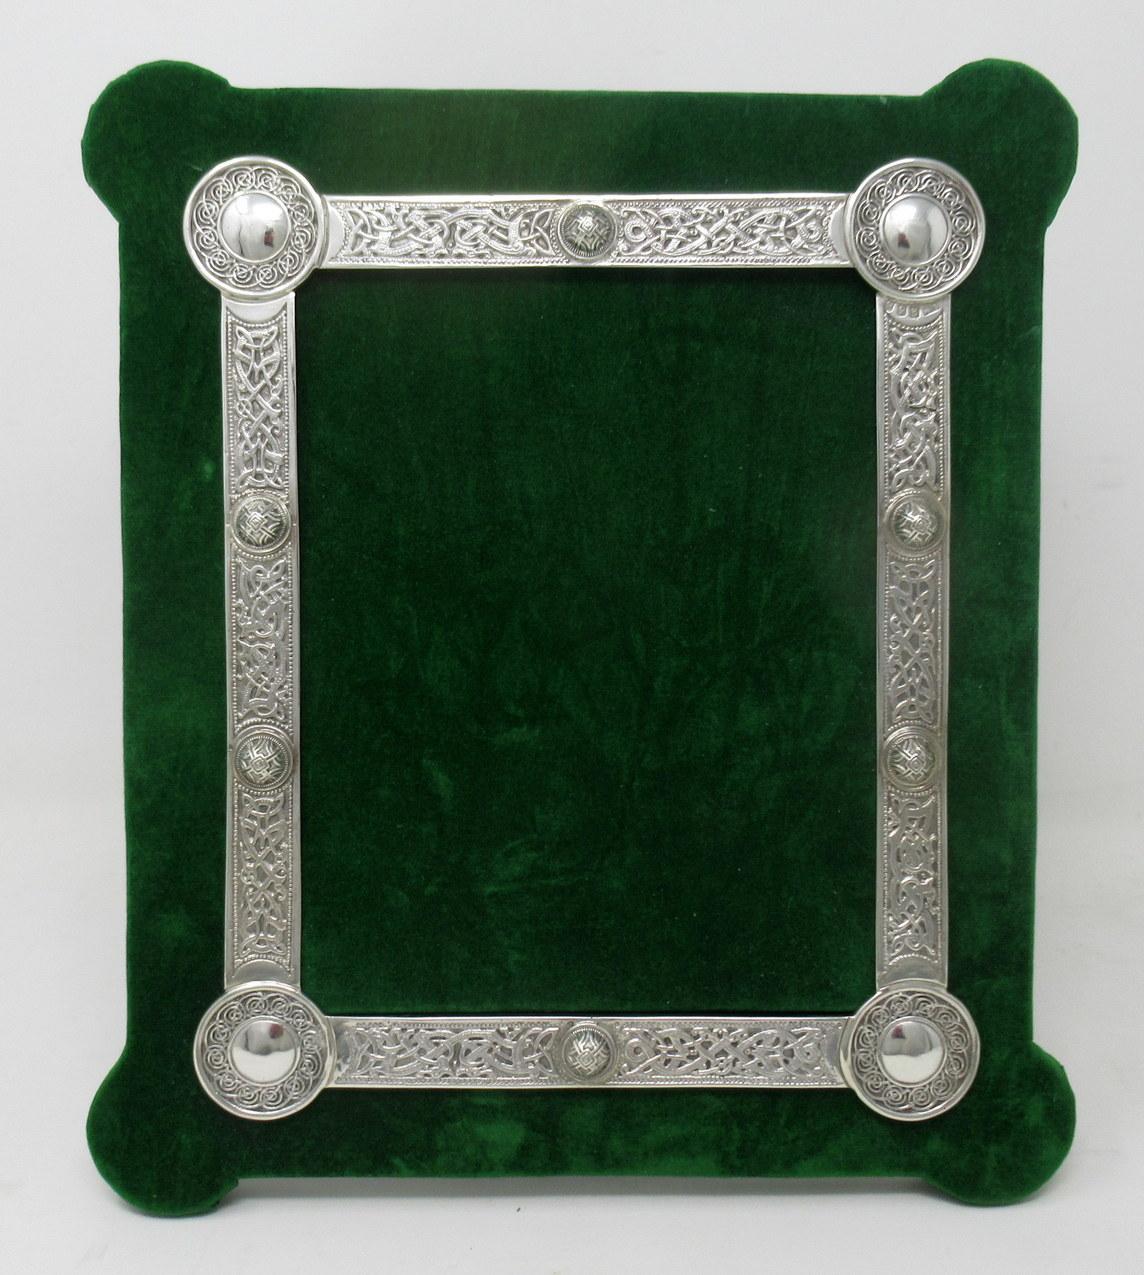 A superb and quite rare example of mid-century Irish sterling silver portrait photograph frame of generous proportions. 

With all-round lavish decorative applied silver border of traditional Celtic design and corner circles with similar